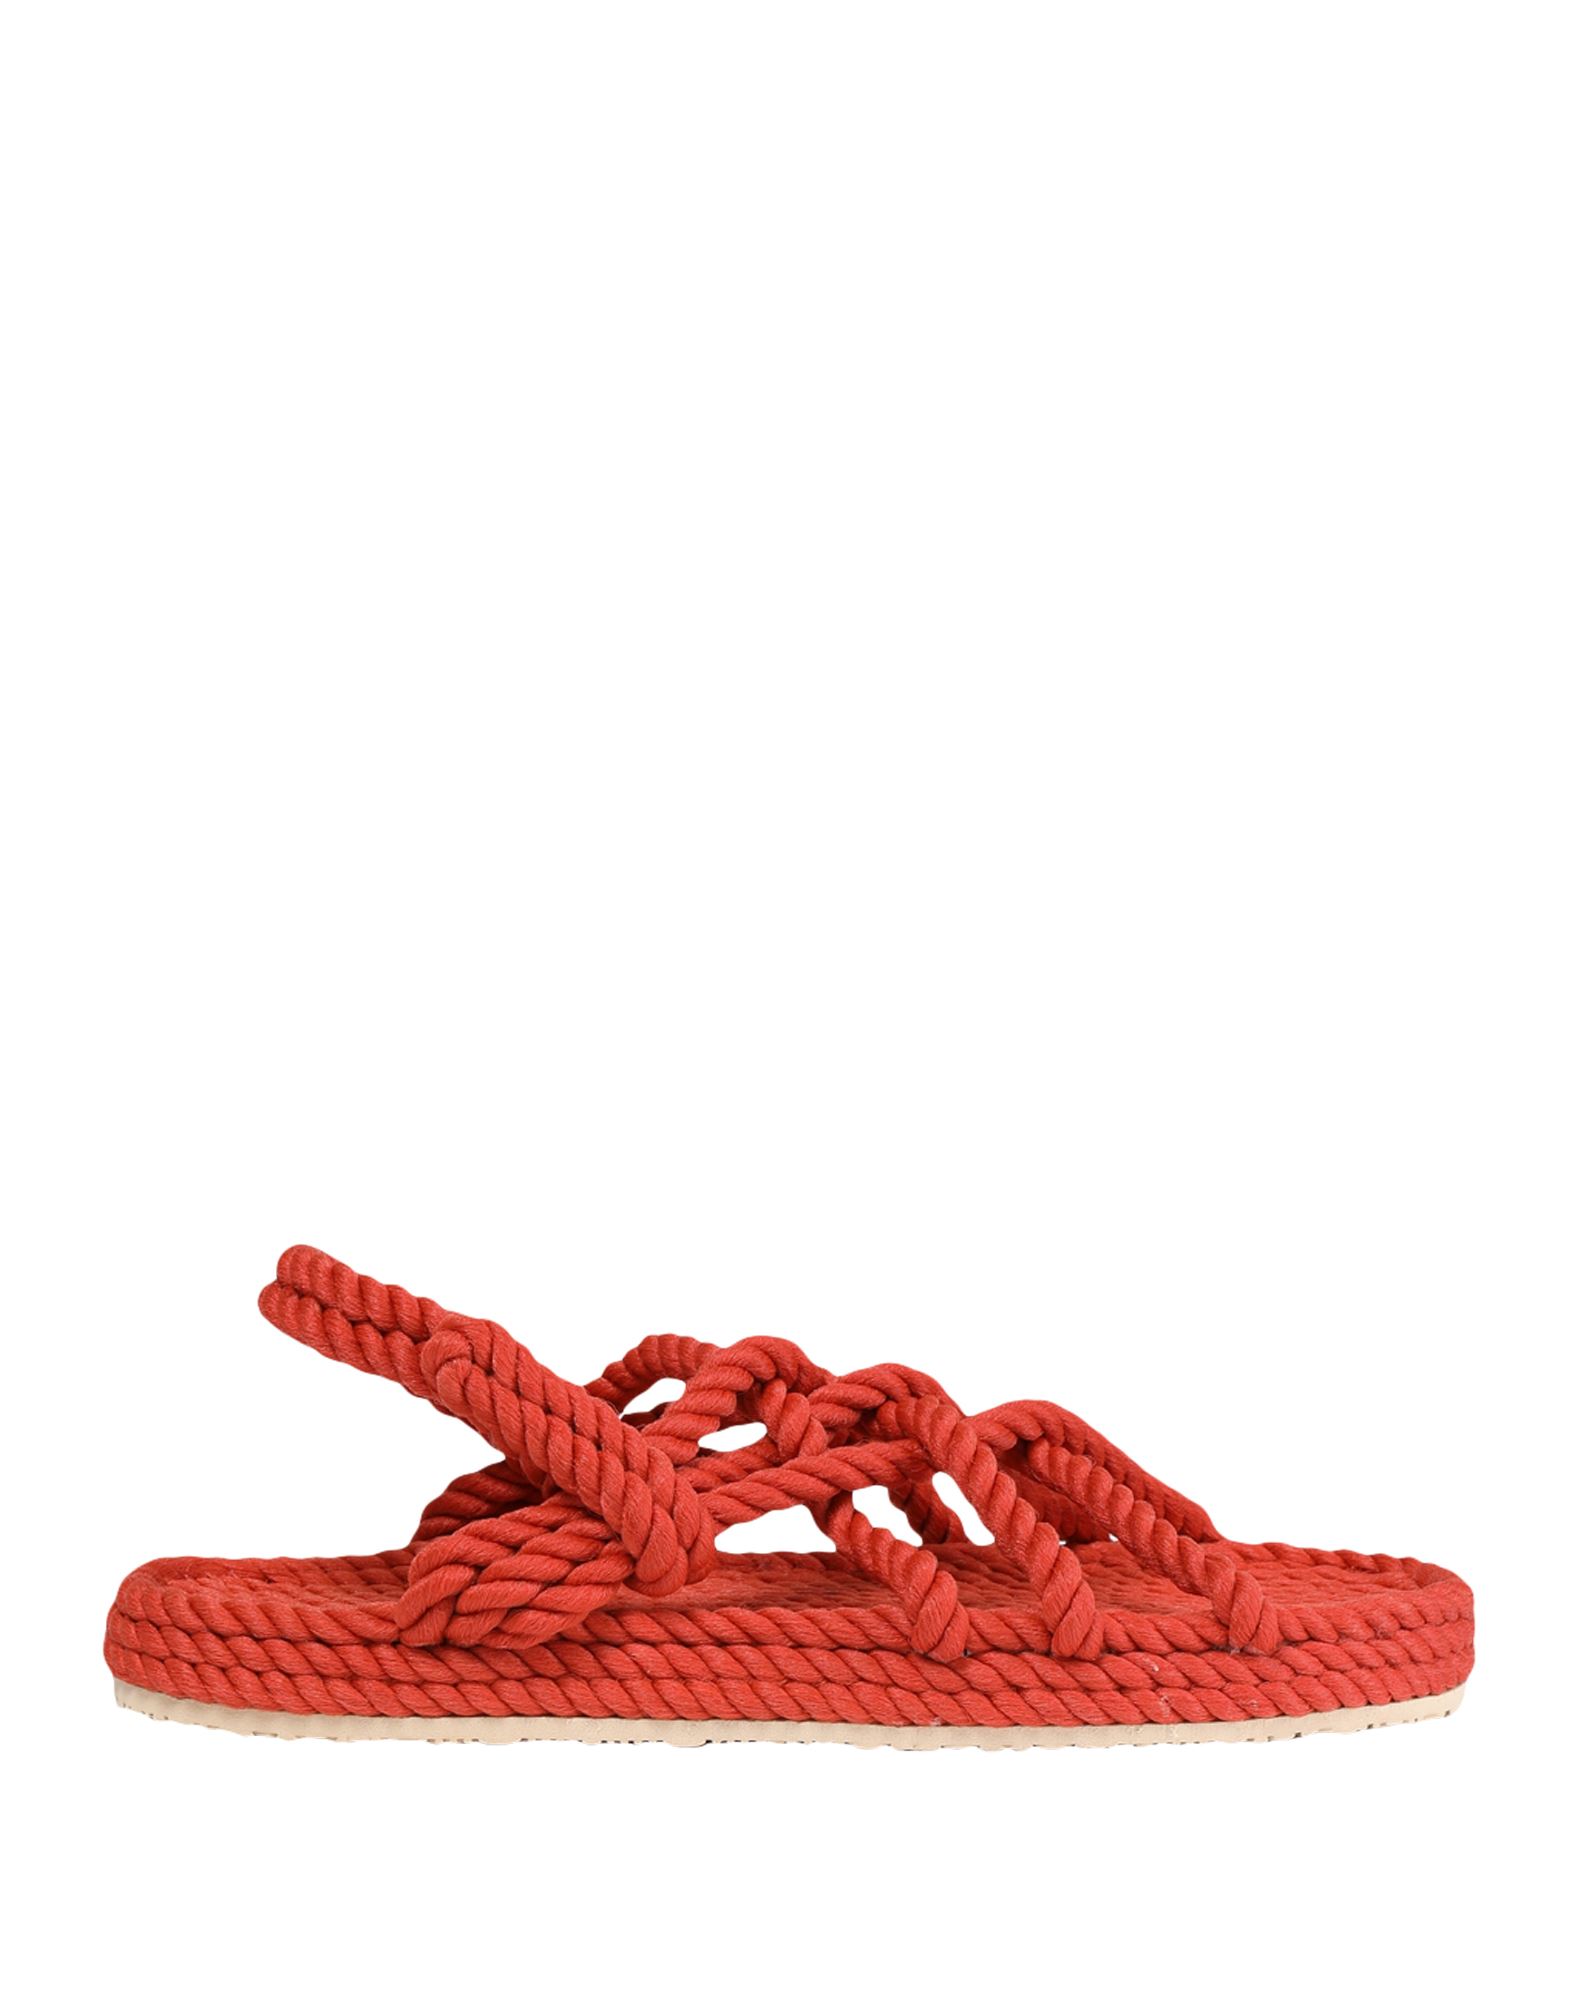 8 By Yoox Sandals In Red